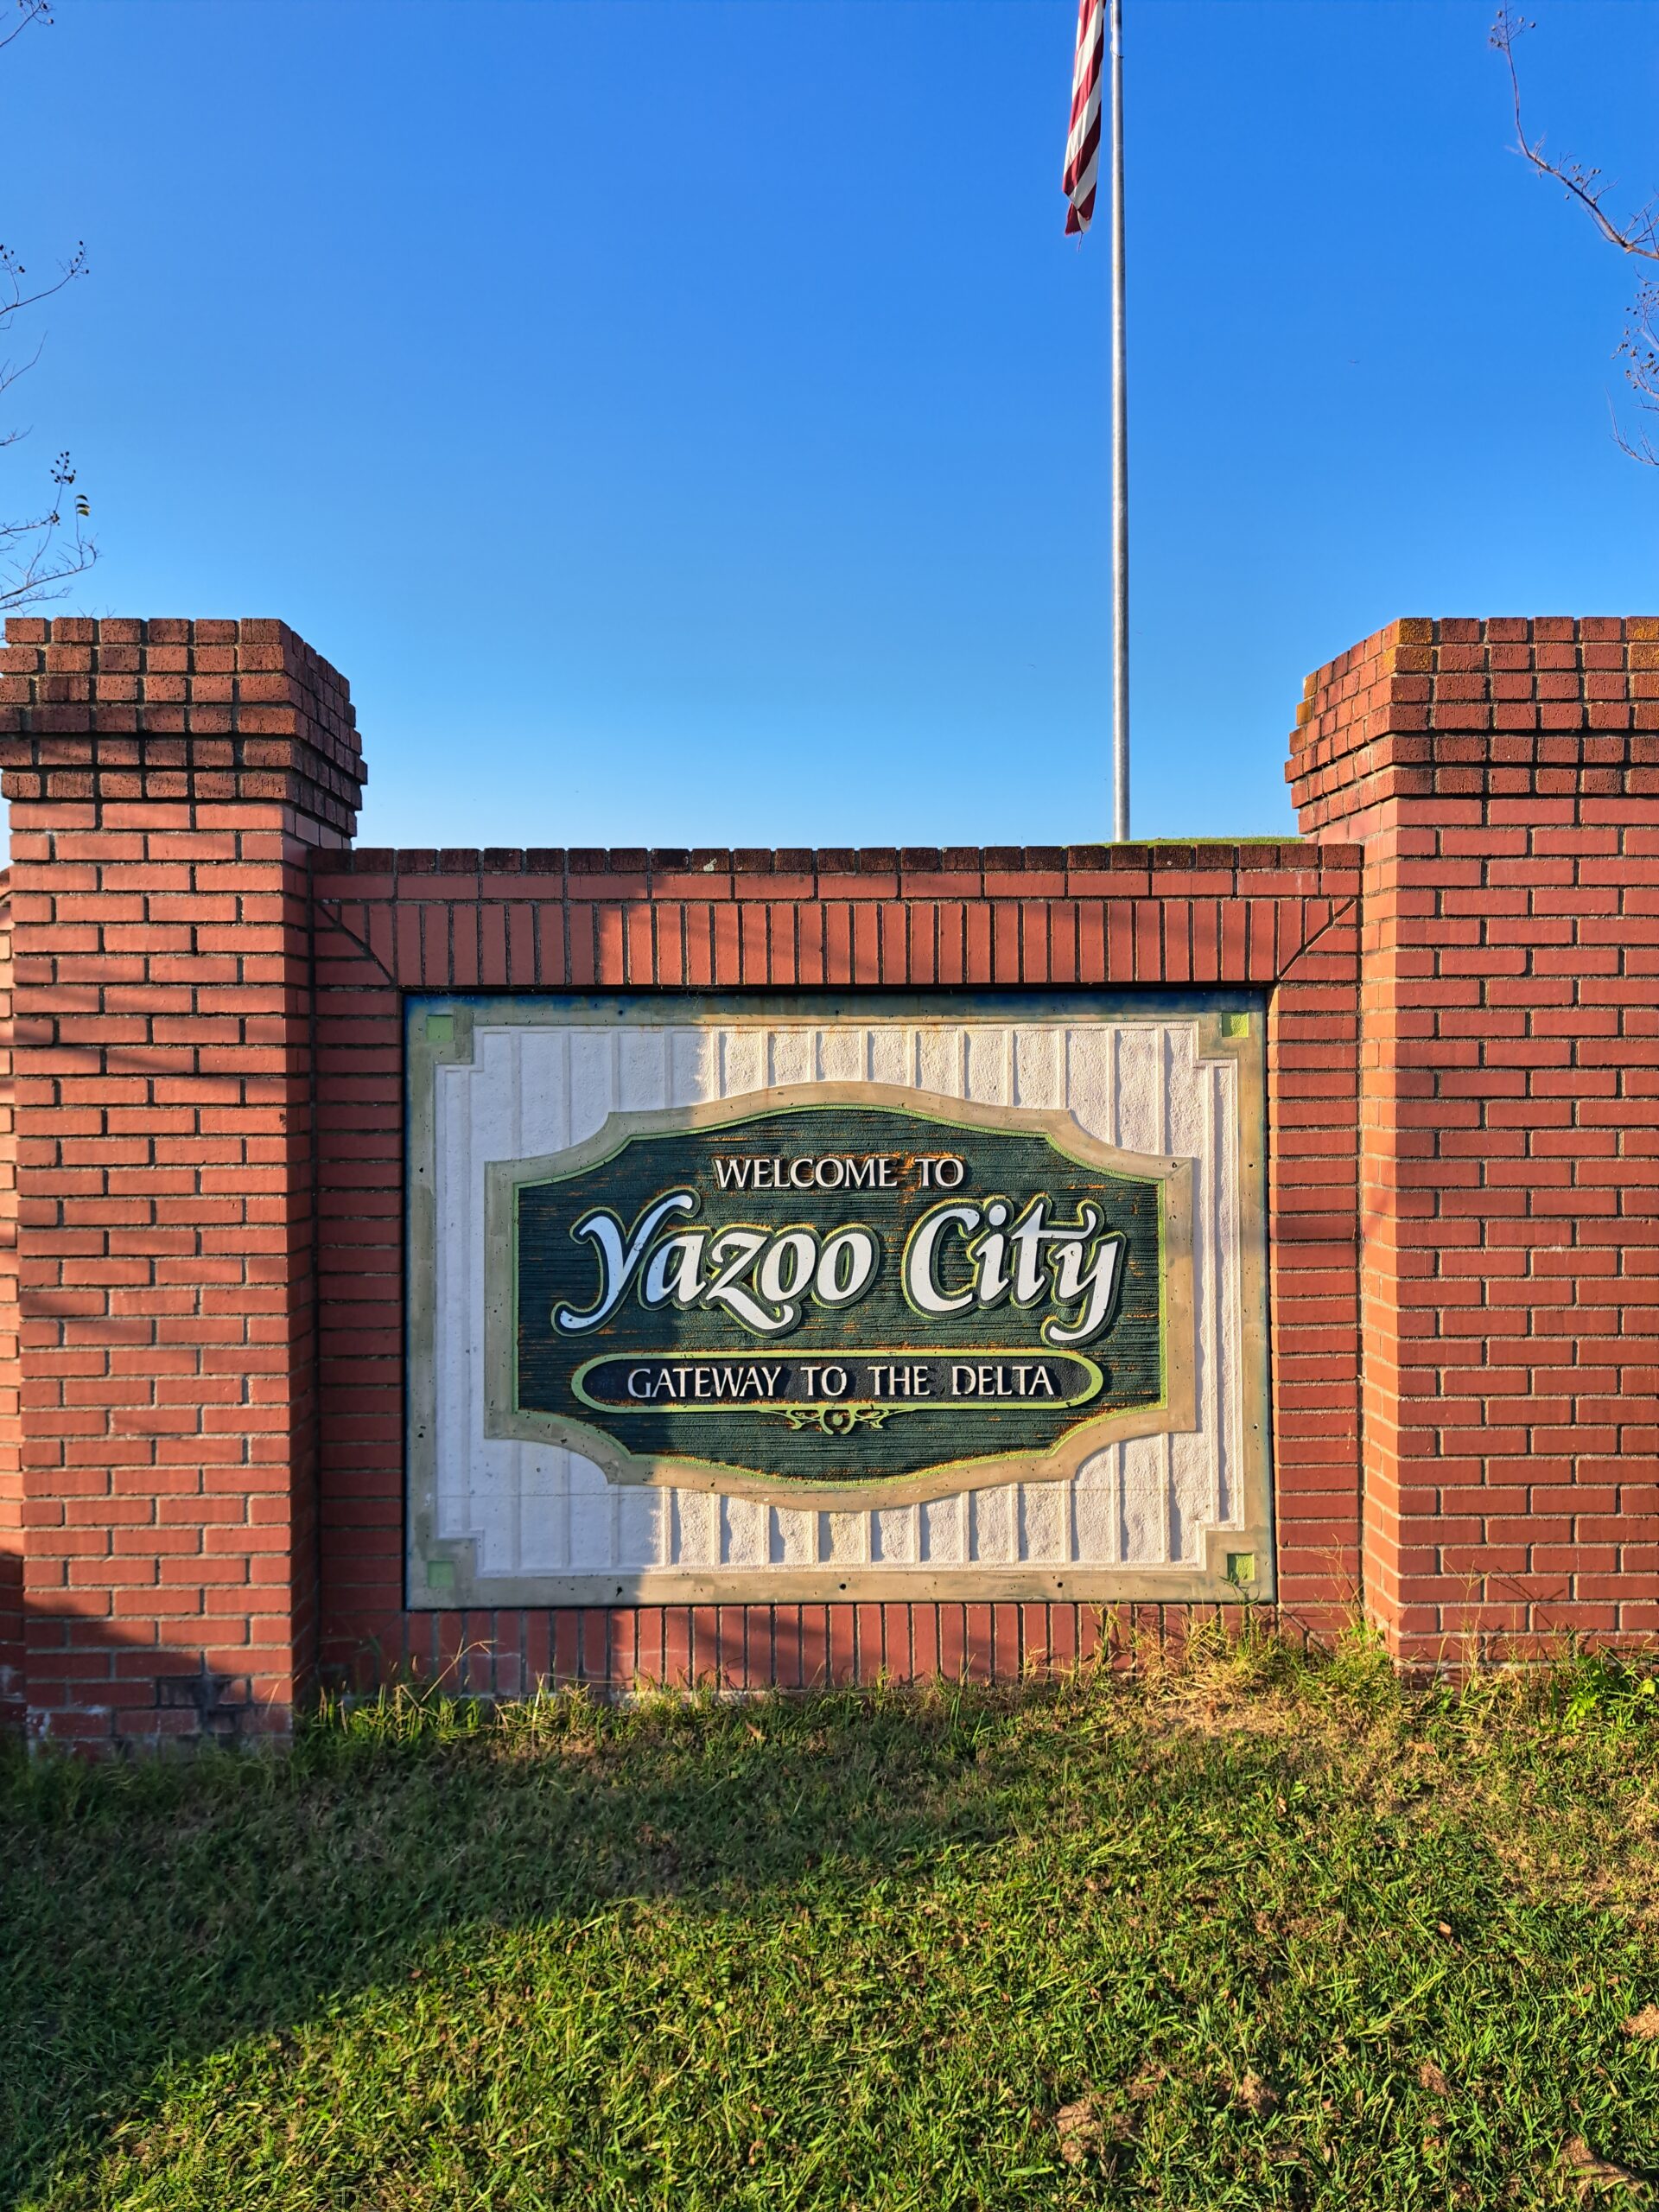 Welcome To Yazoo City sign by Chillin662